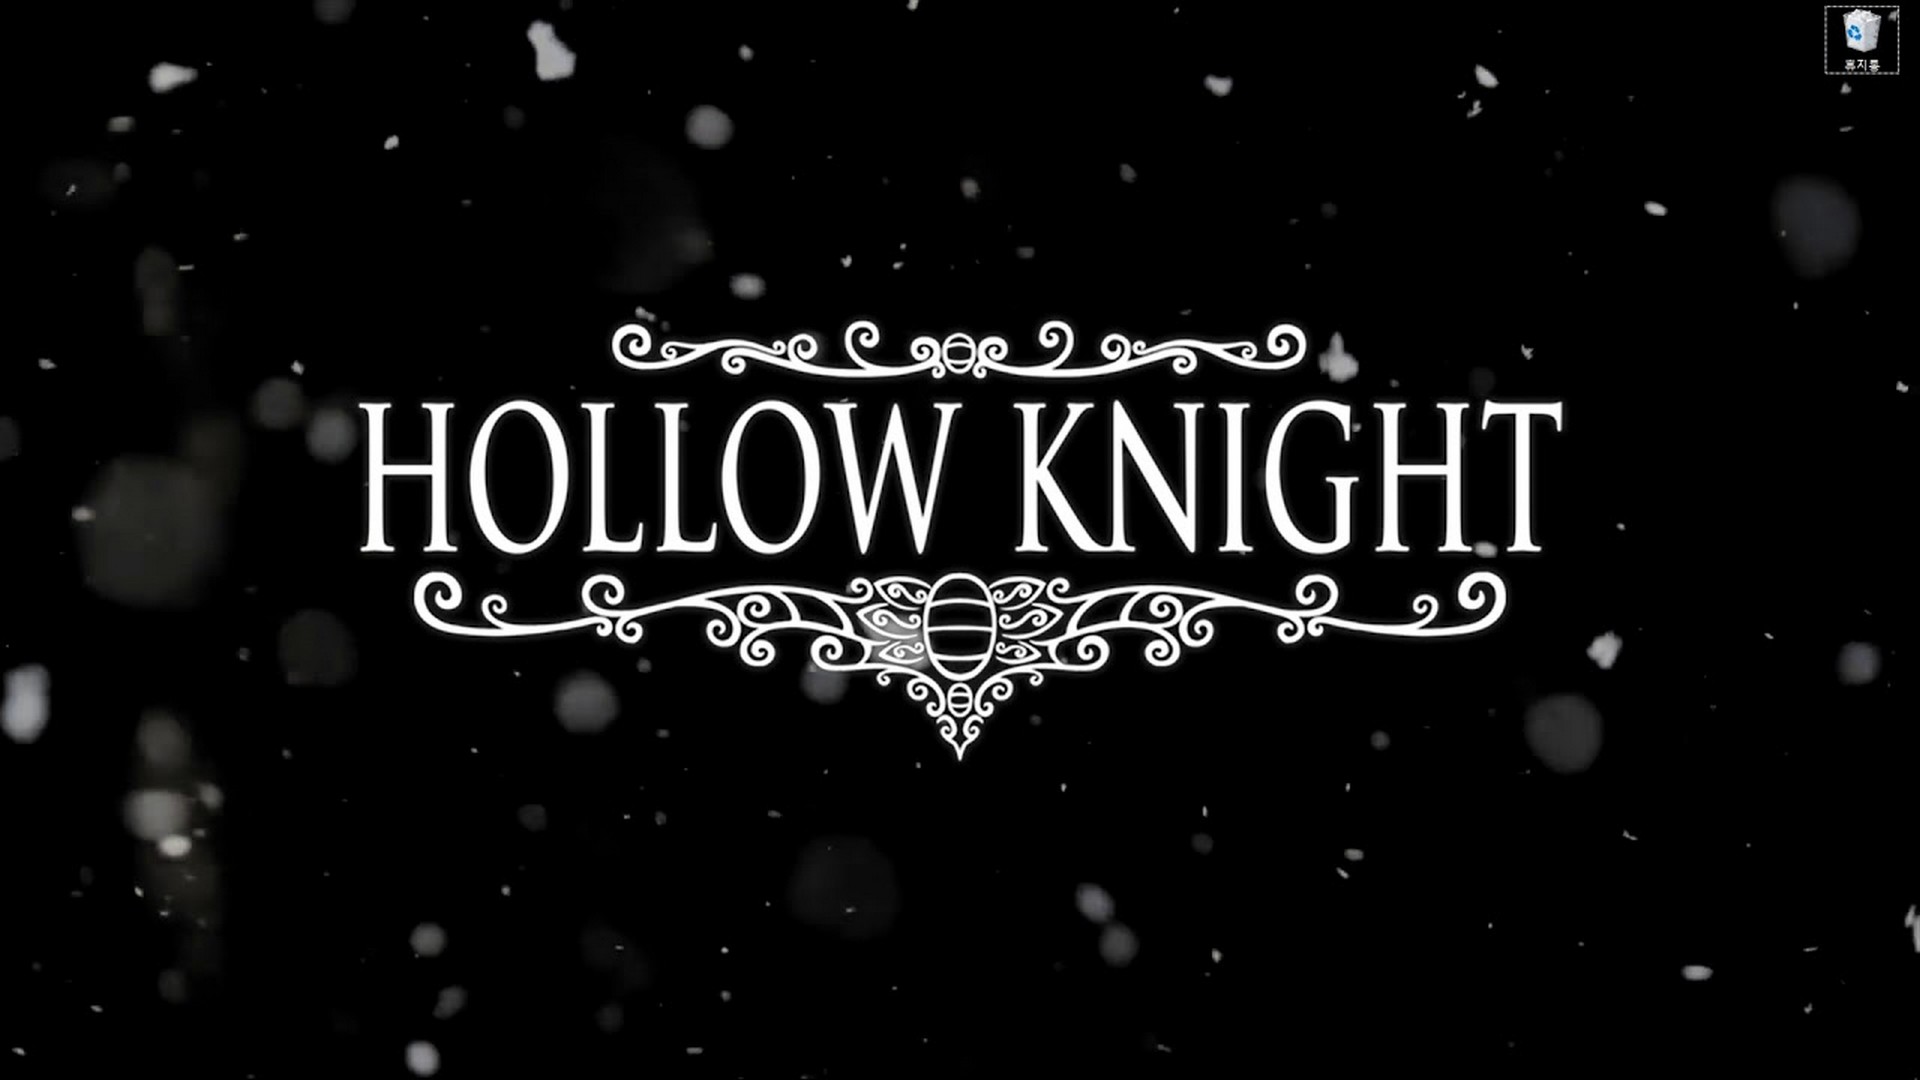 Hollow Knight Desktop Backgrounds HD with high-resolution 1920x1080 pixel. You can use this wallpaper for your Windows and Mac OS computers as well as your Android and iPhone smartphones